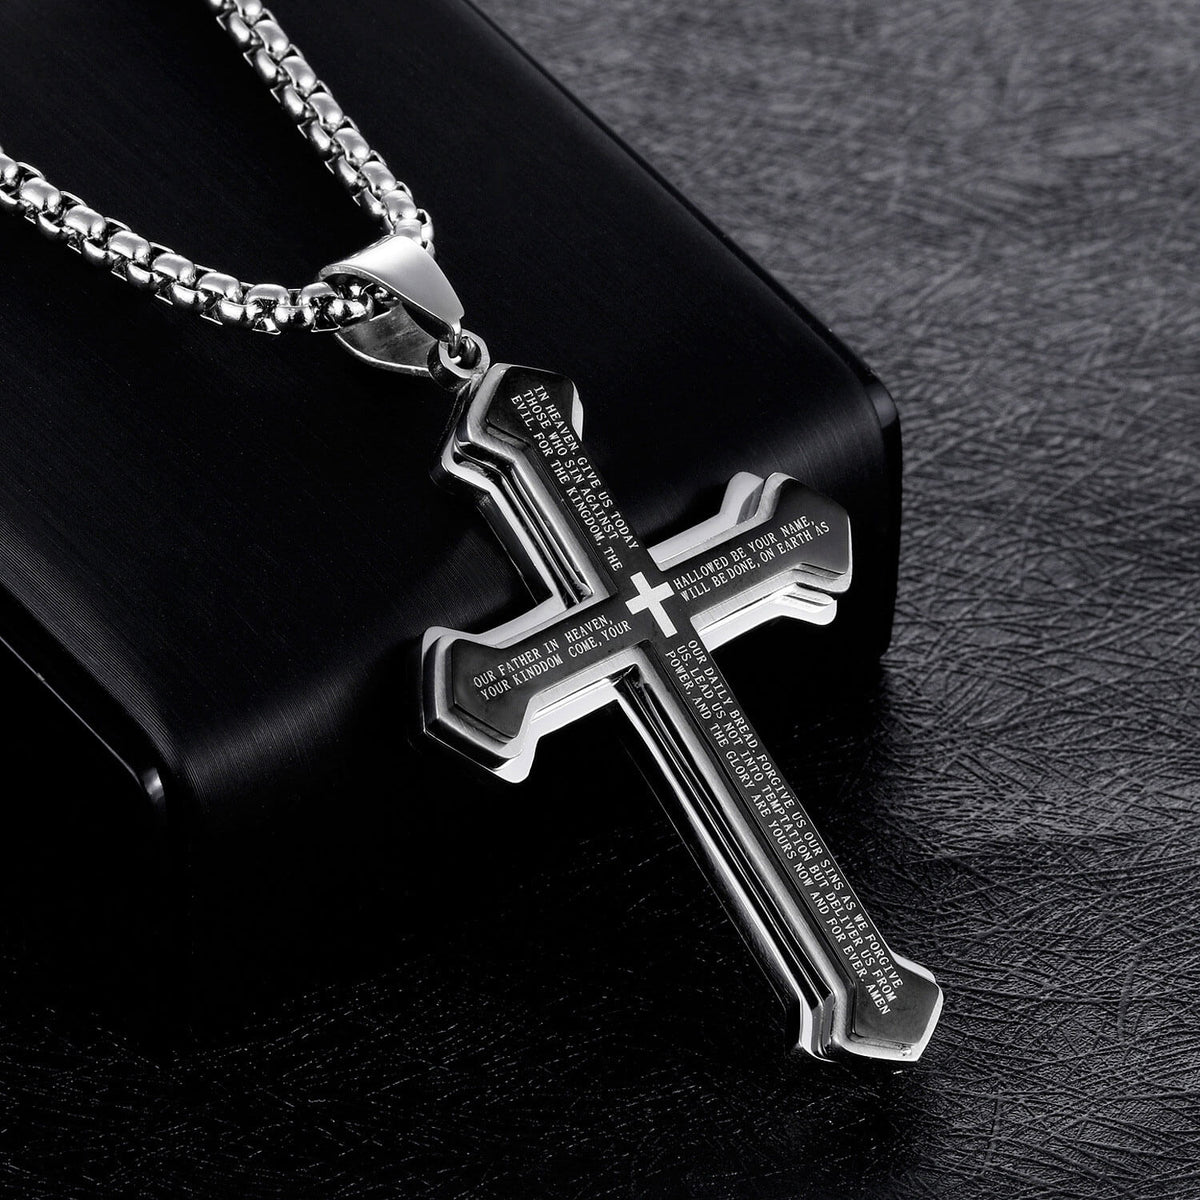 The Lord’s Prayer Cross Necklace necklace GrindStyle 